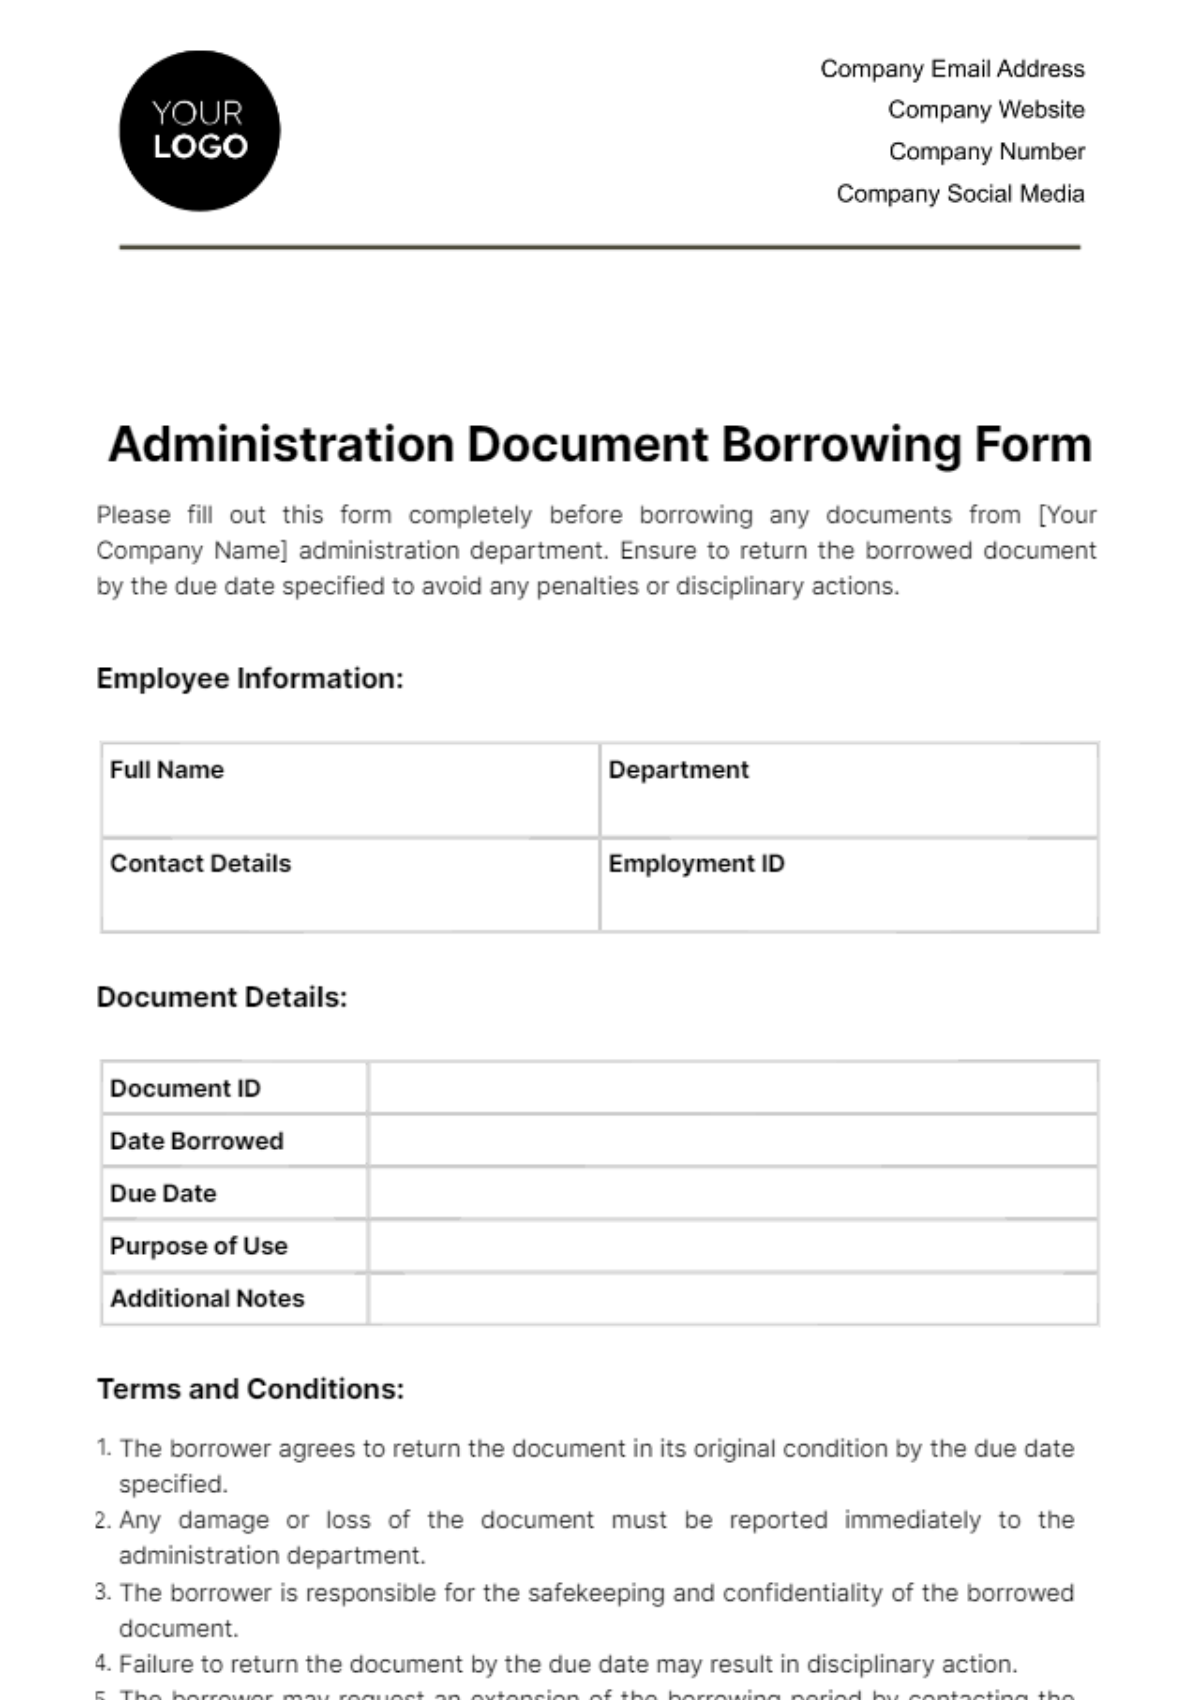 Free Administration Document Borrowing Form Template